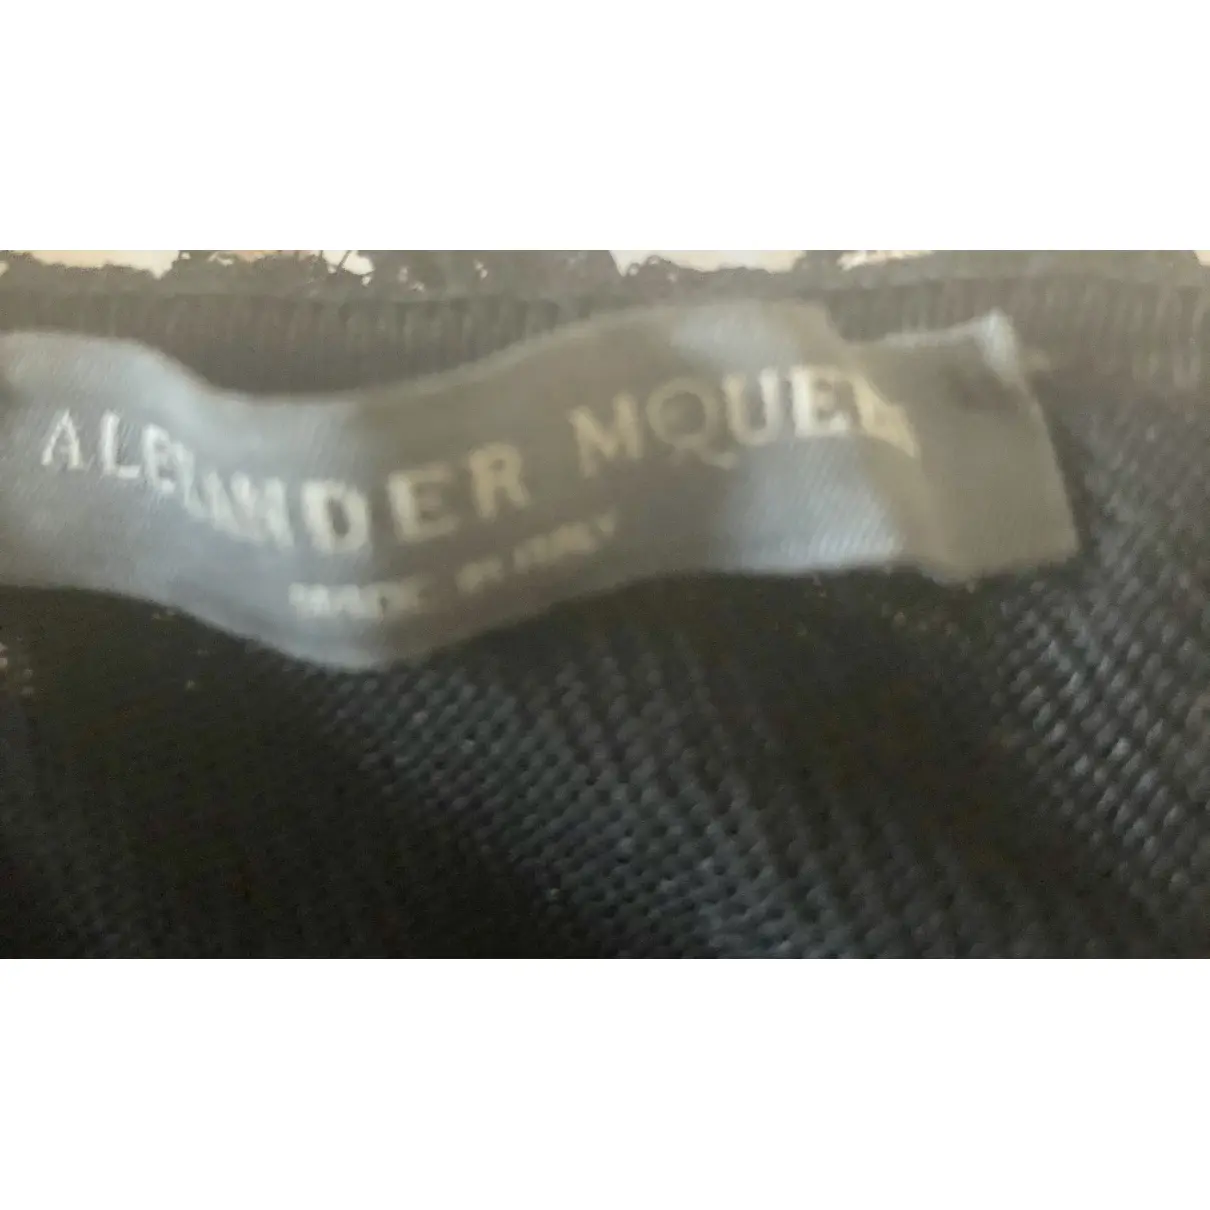 Alexander McQueen Lace mid-length dress for sale